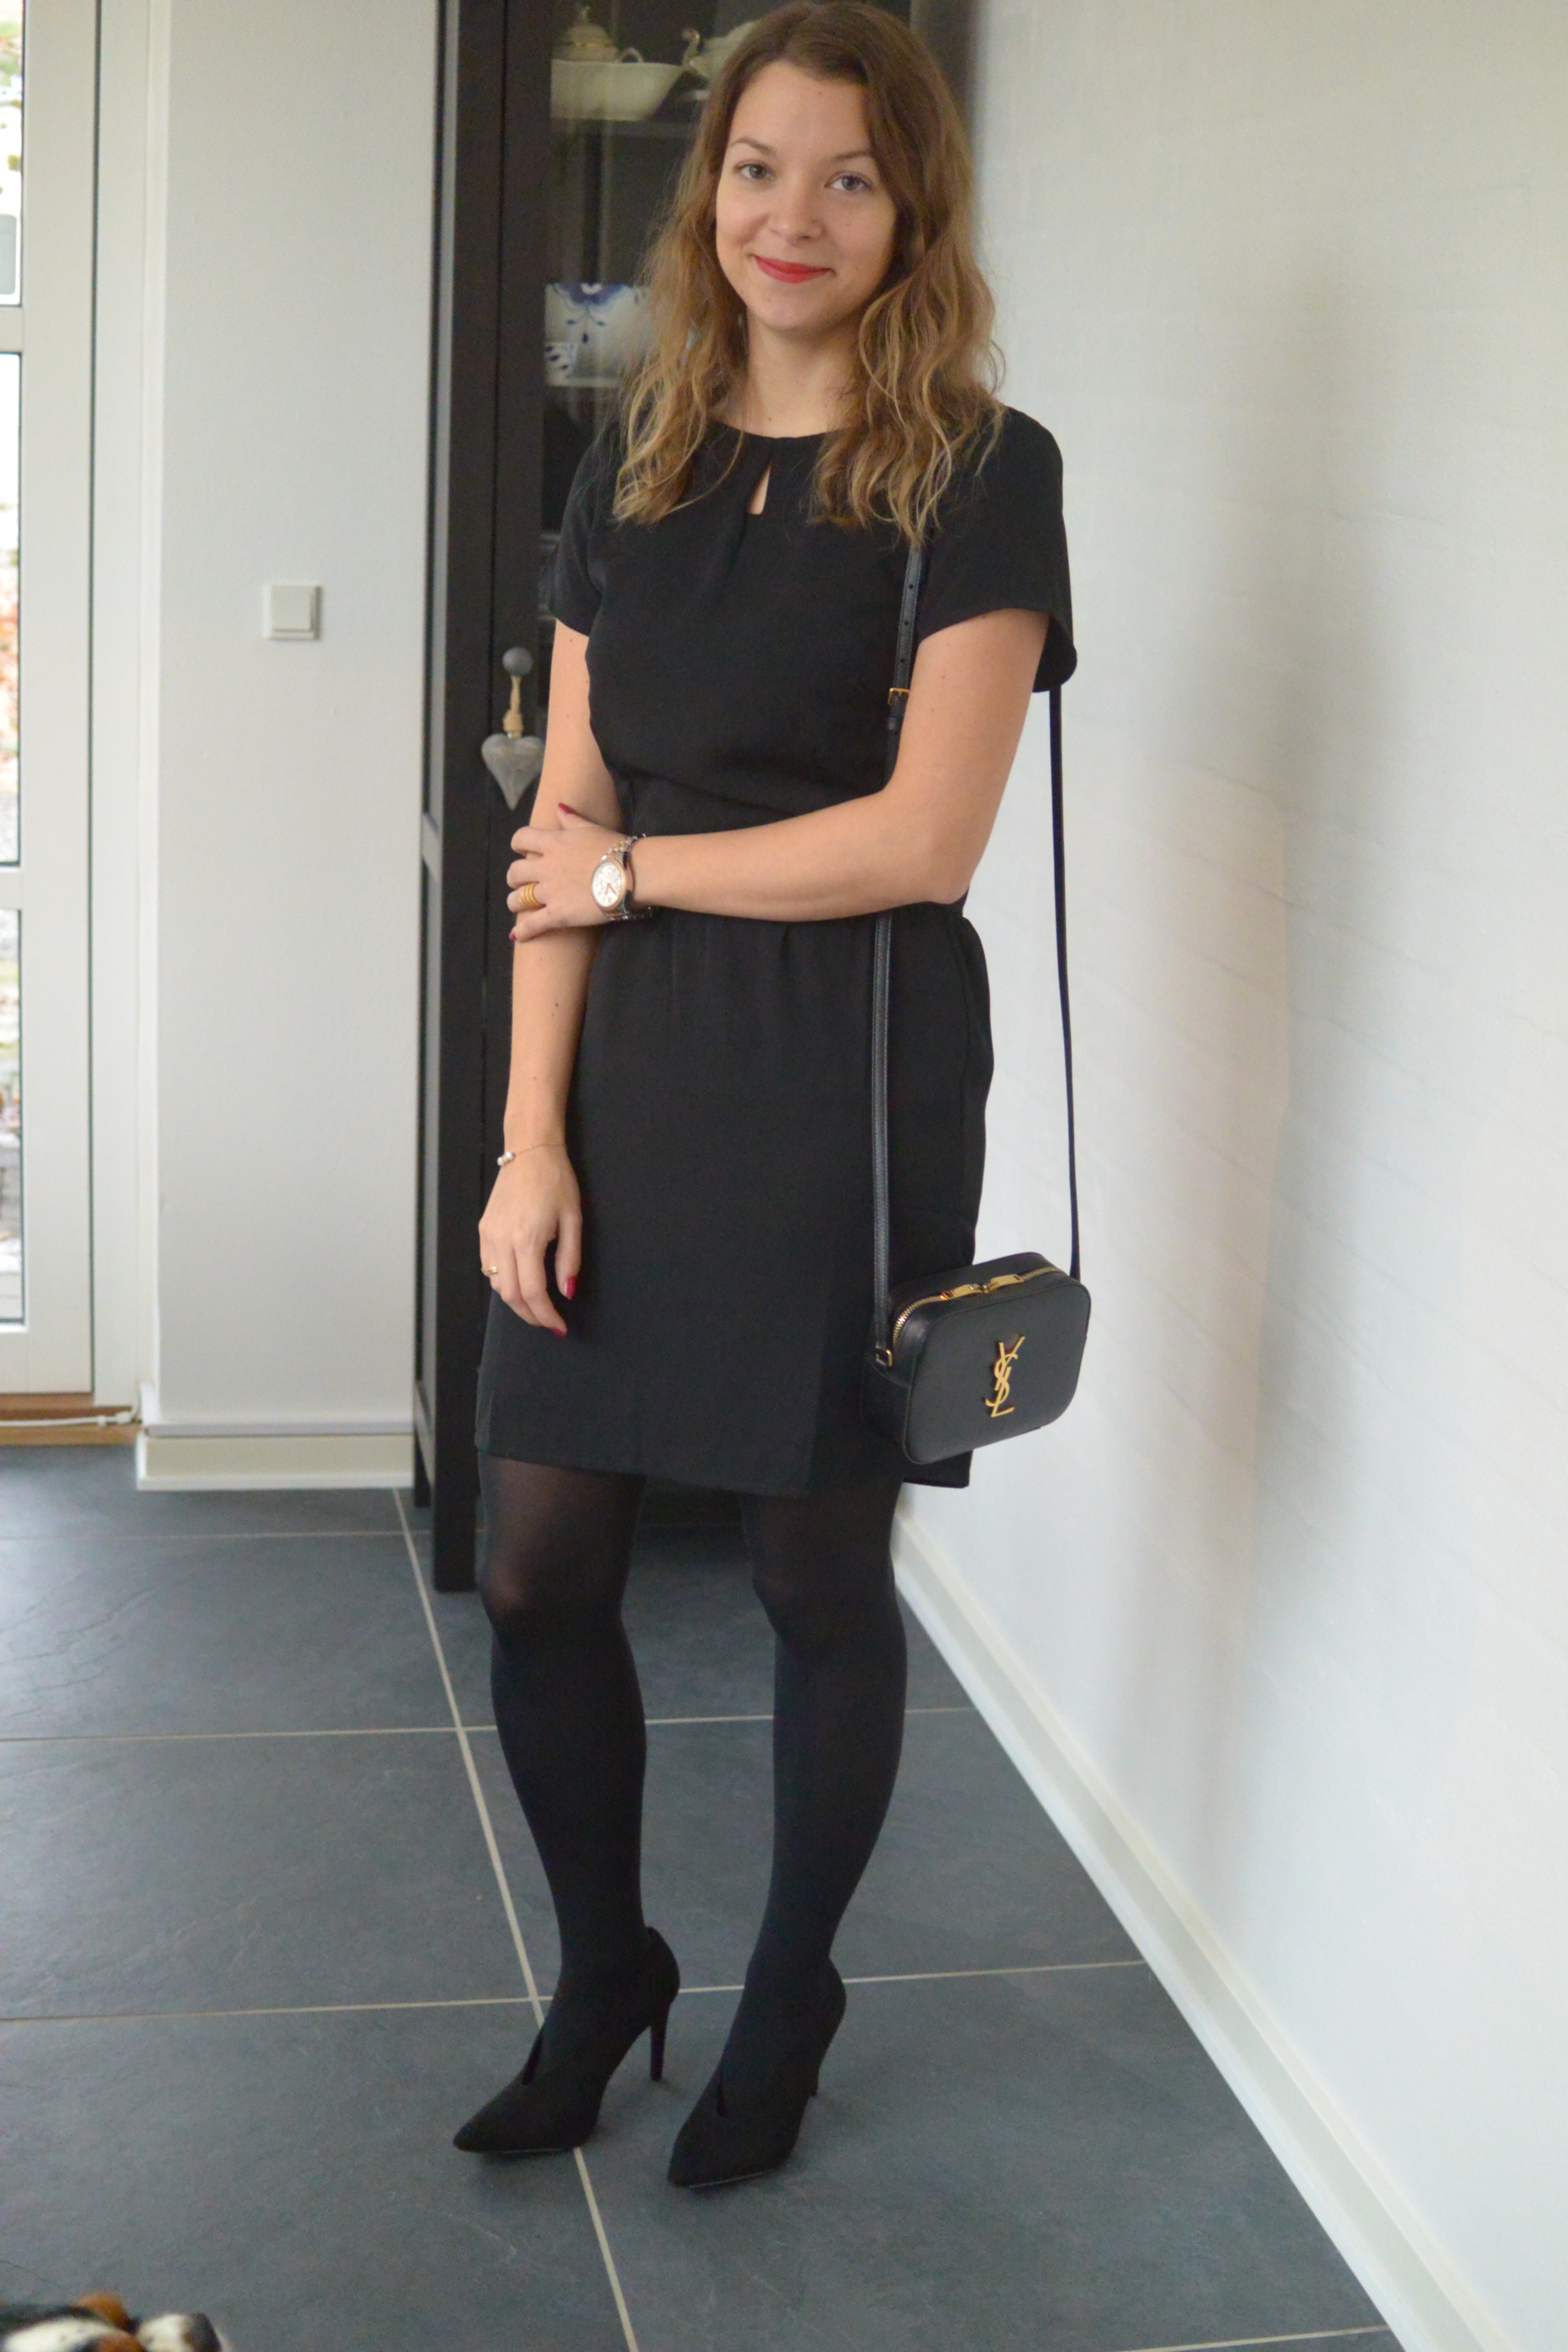 Christmas dress | Outfit of the day | Simone Bjerregaard